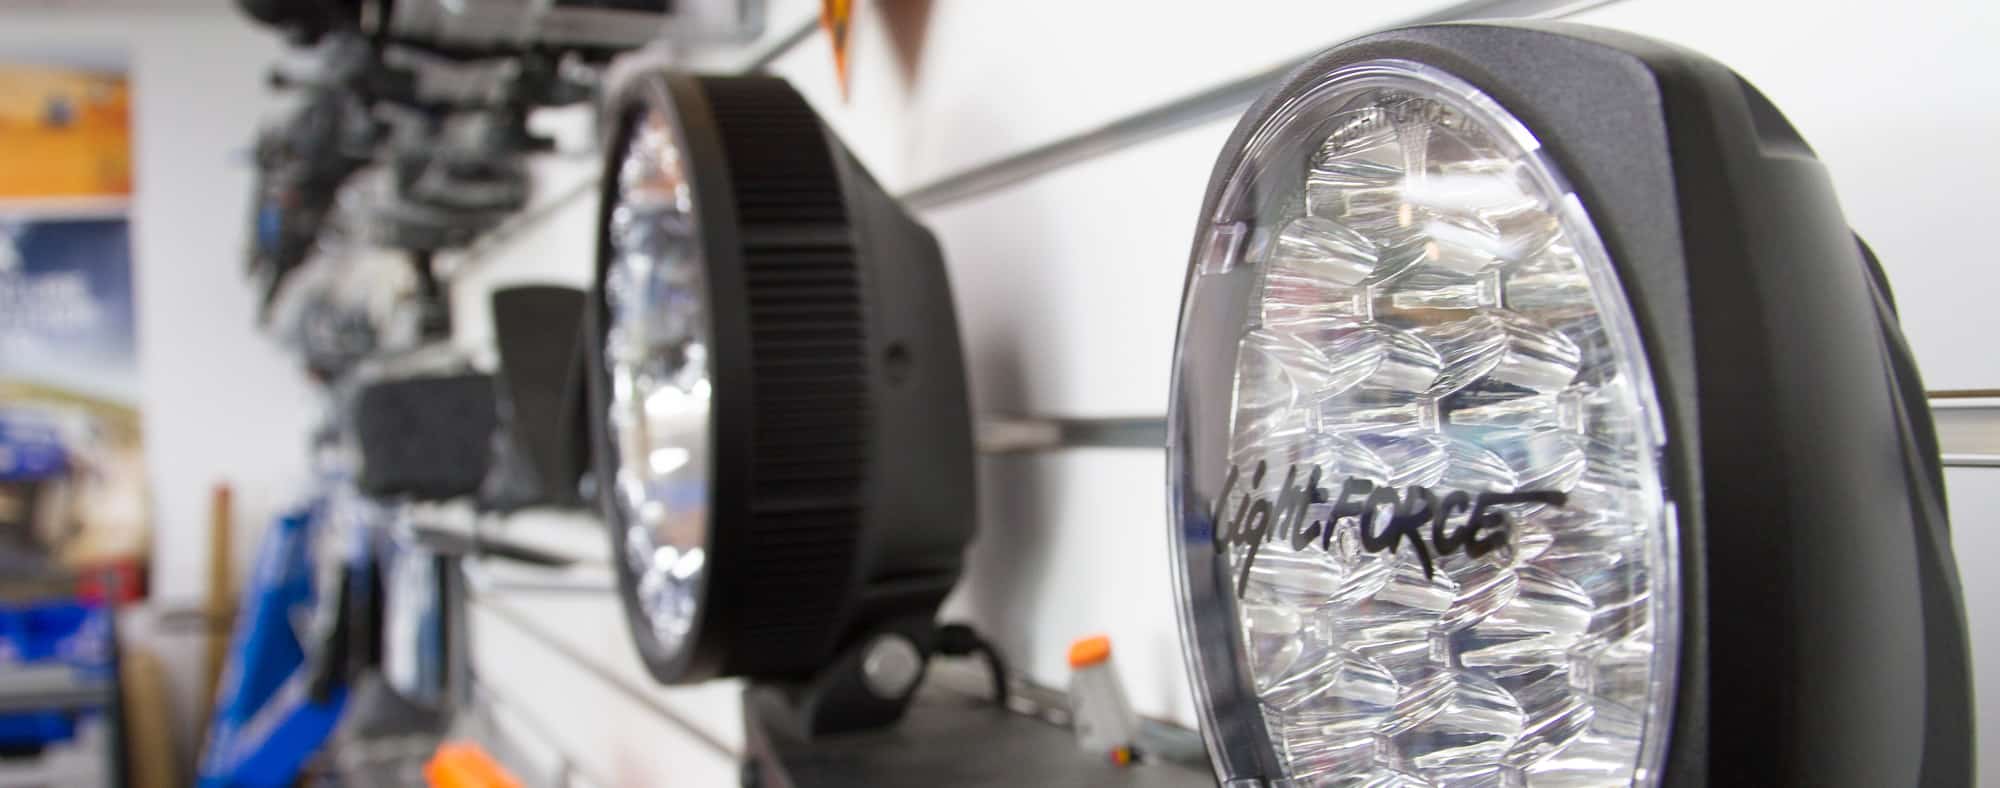 Close-up of spotlights on wall in showroom - spotlights Bathurst - Offroad 4x4 accessories